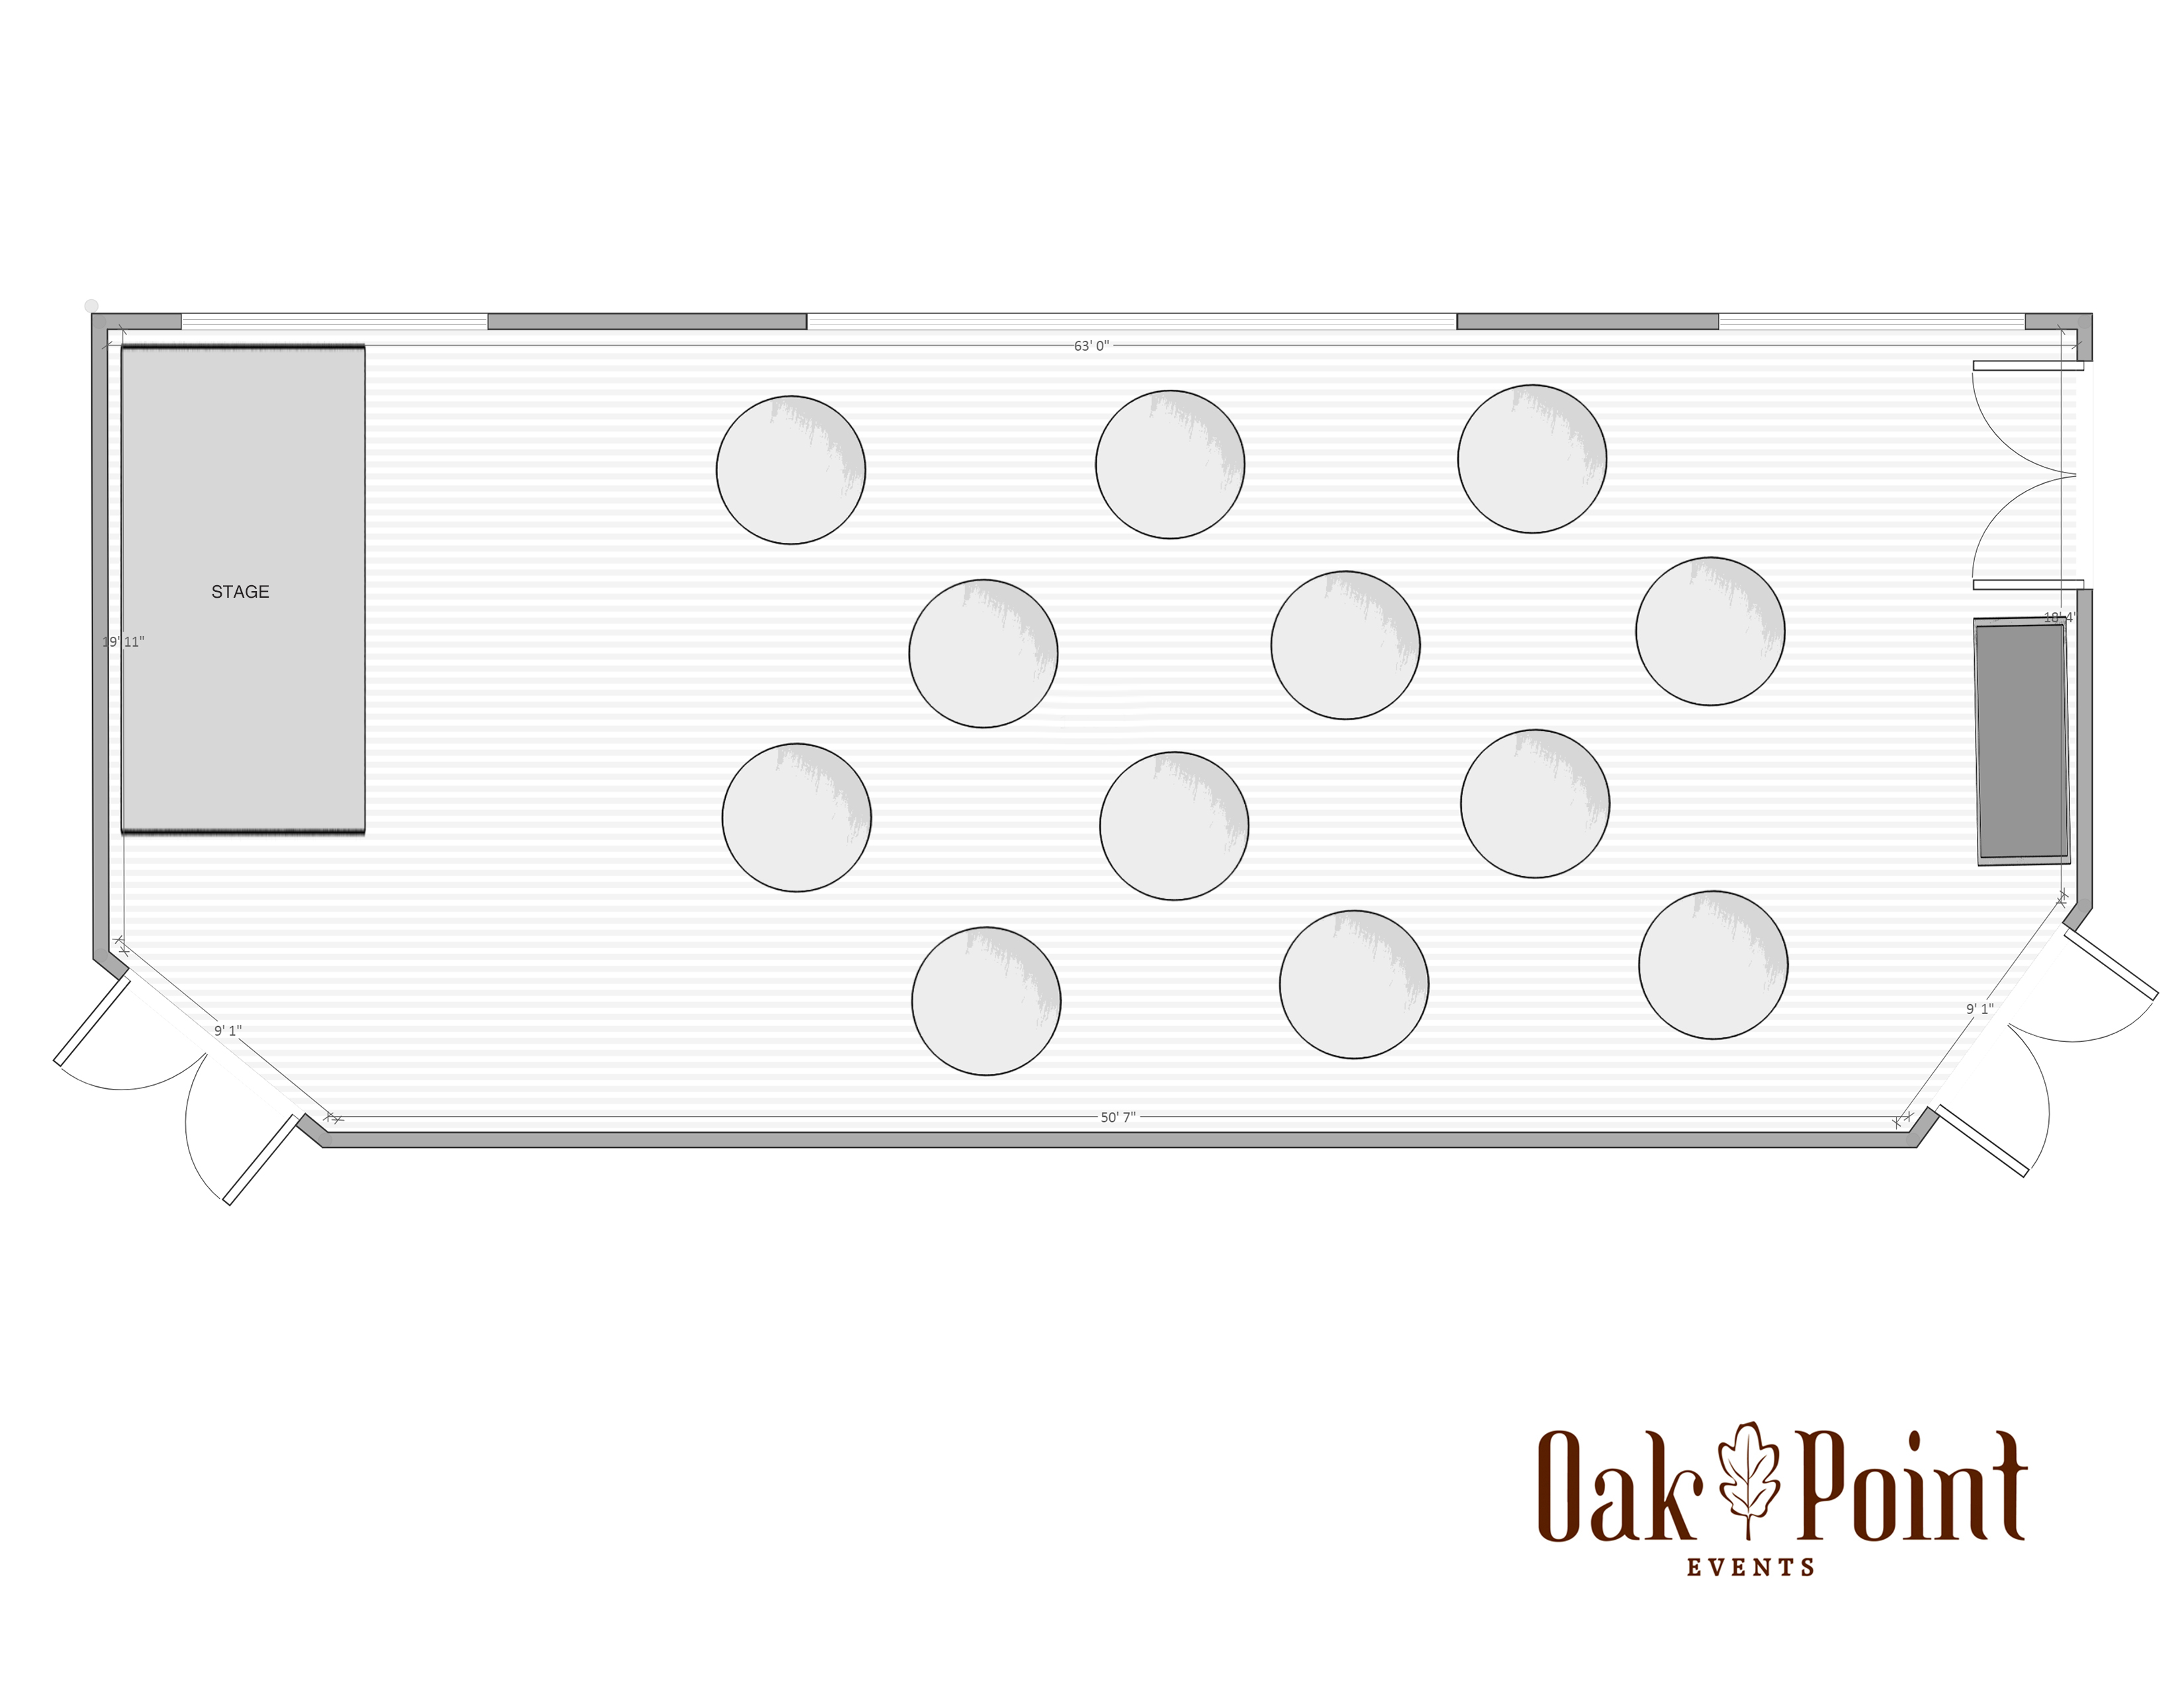 Oak Point Events Floorplan with Sample Layout